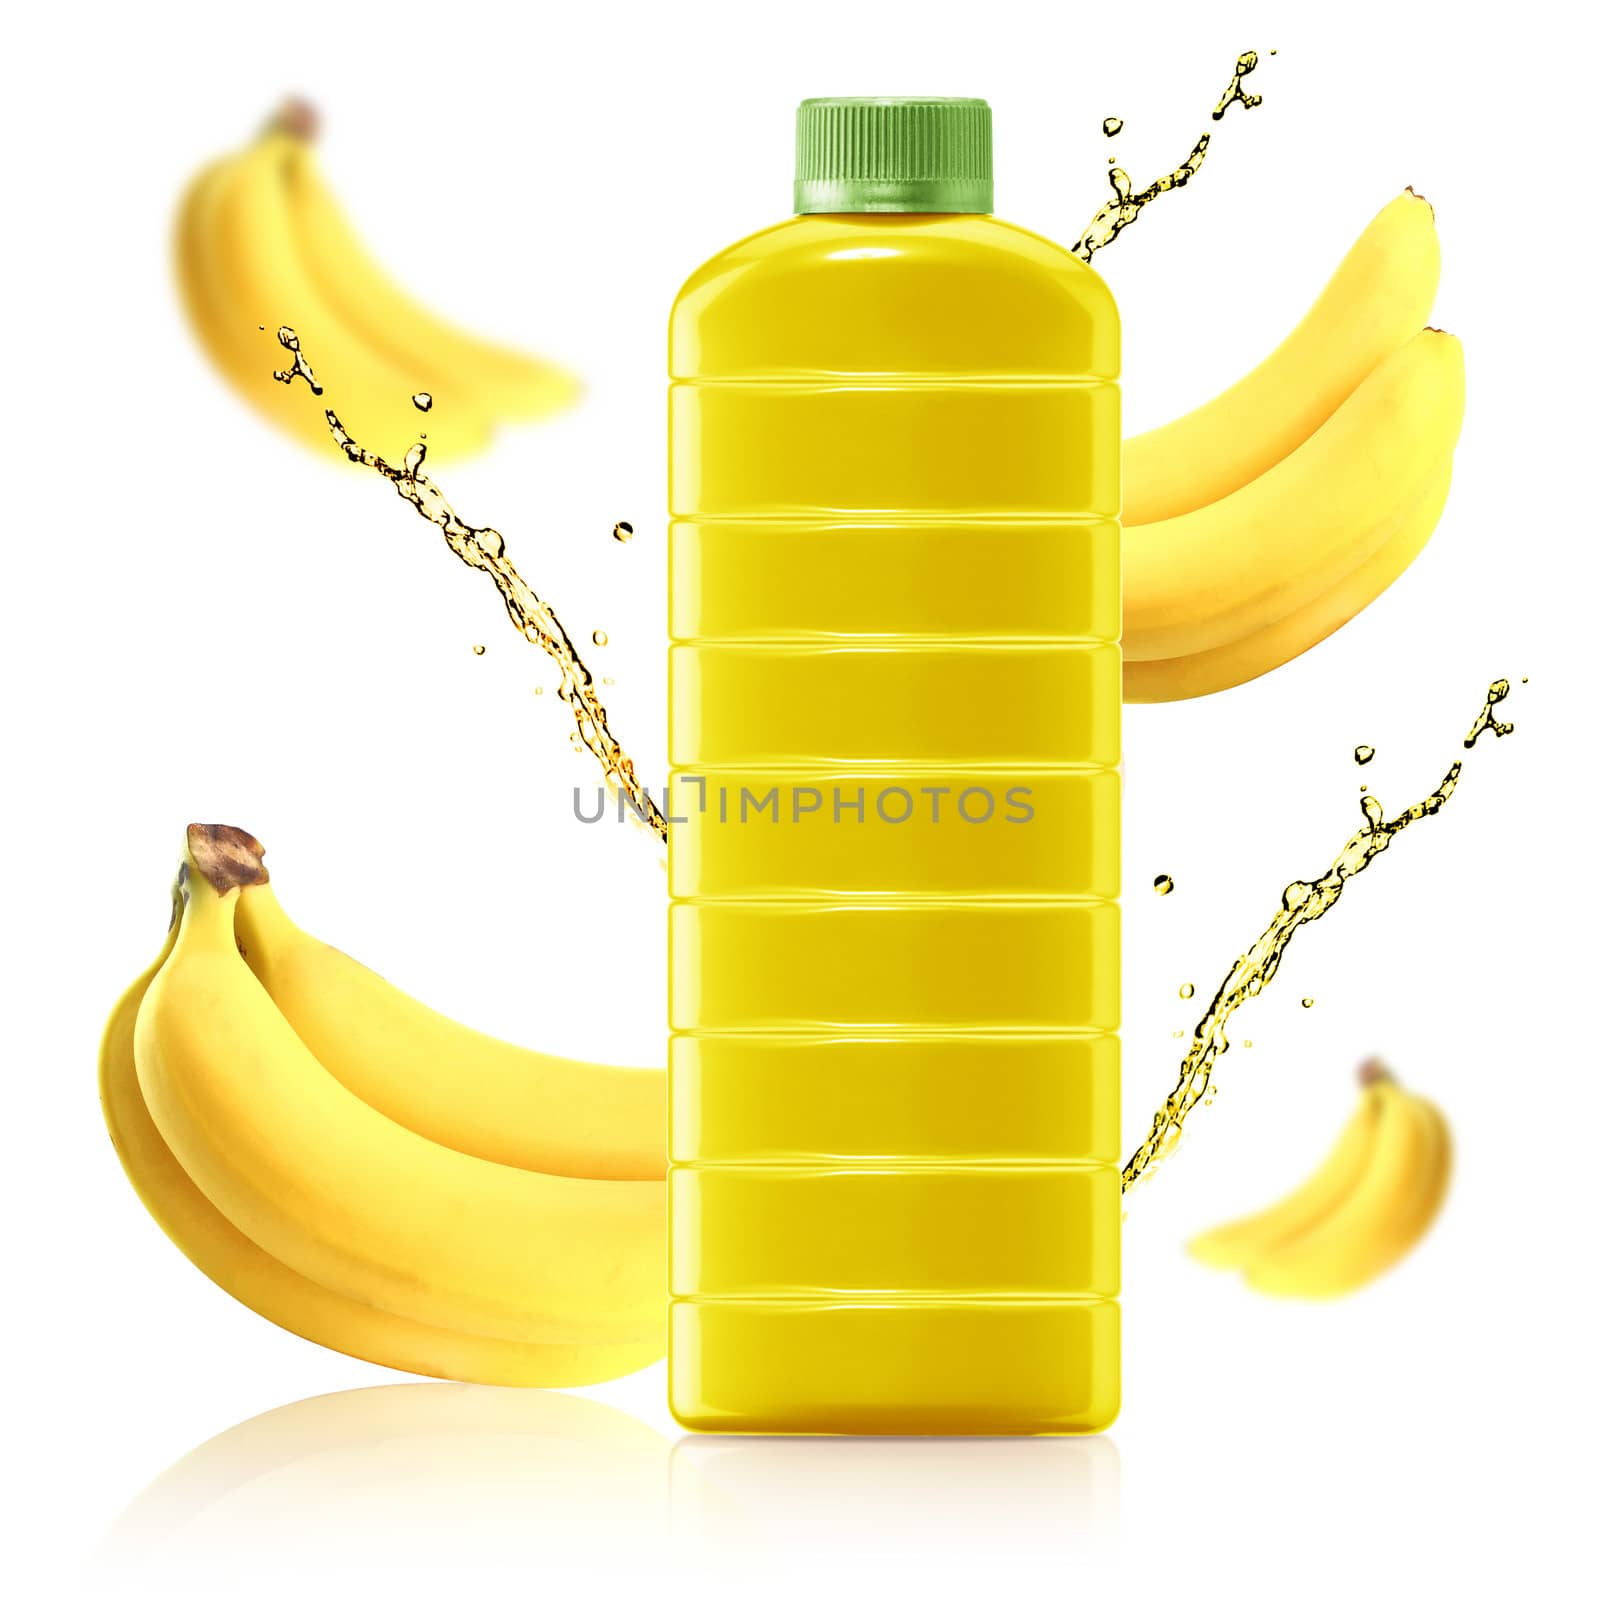 Bananas juice in a plastic container jug on a white background.